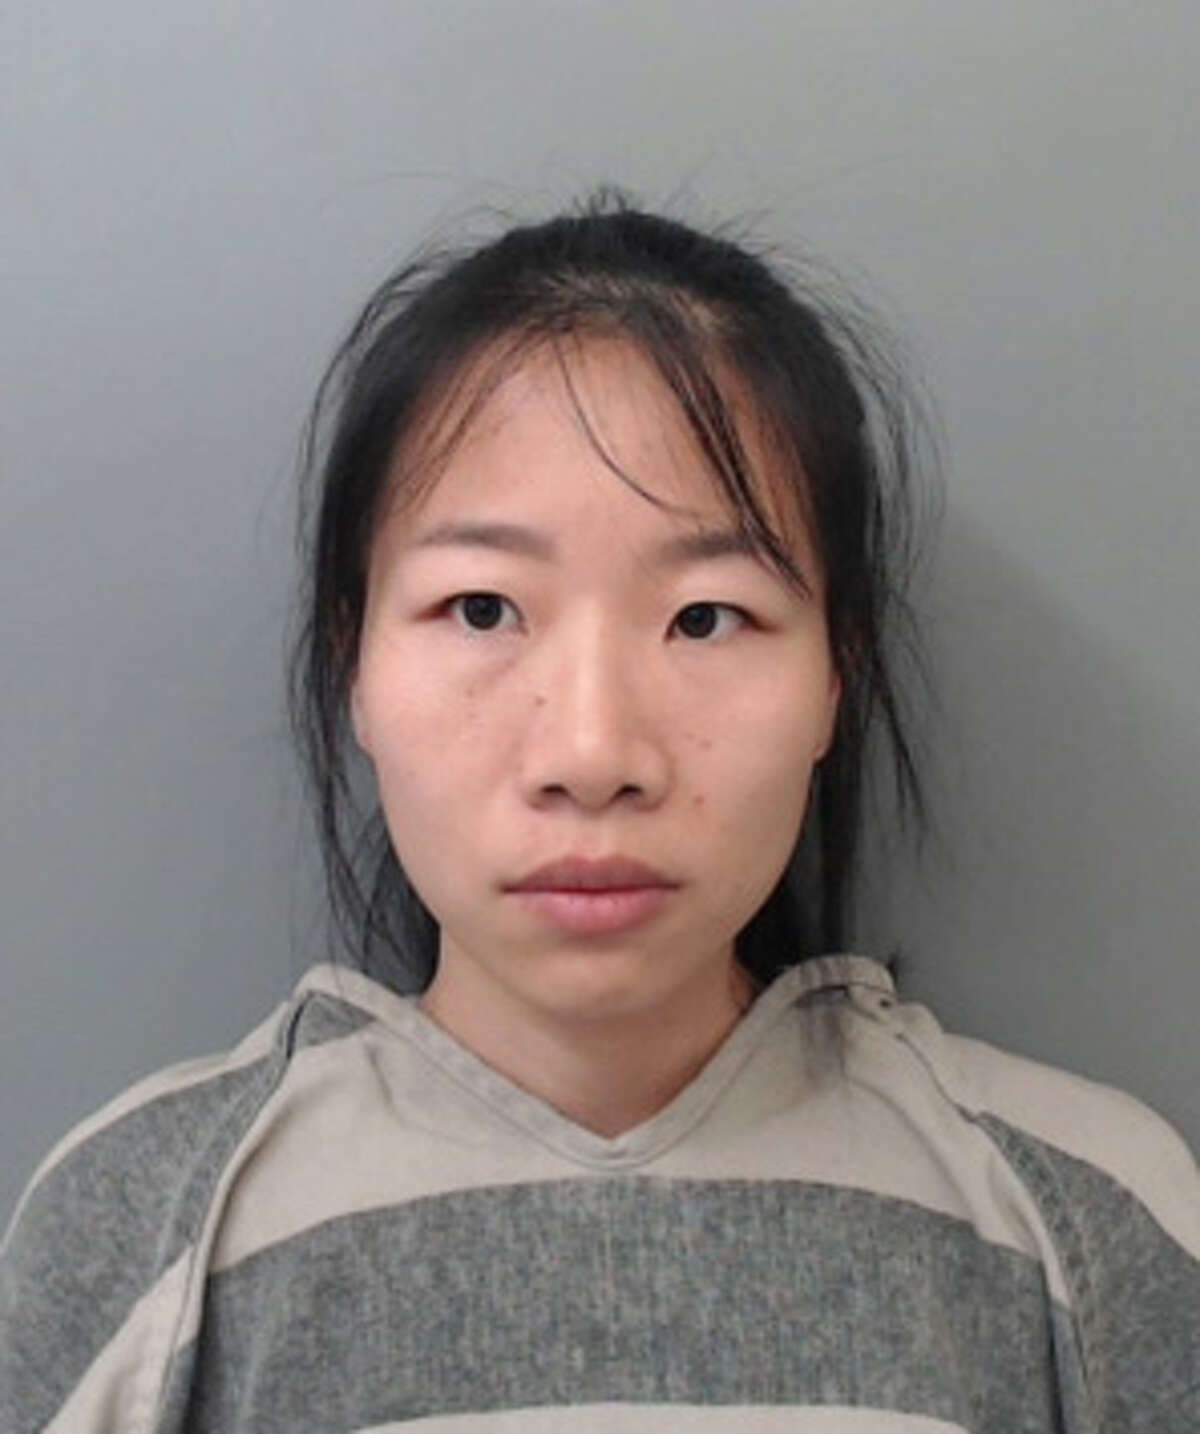 Na Chen, 31, was charged with gambling promotion and engaging in organized criminal activity.